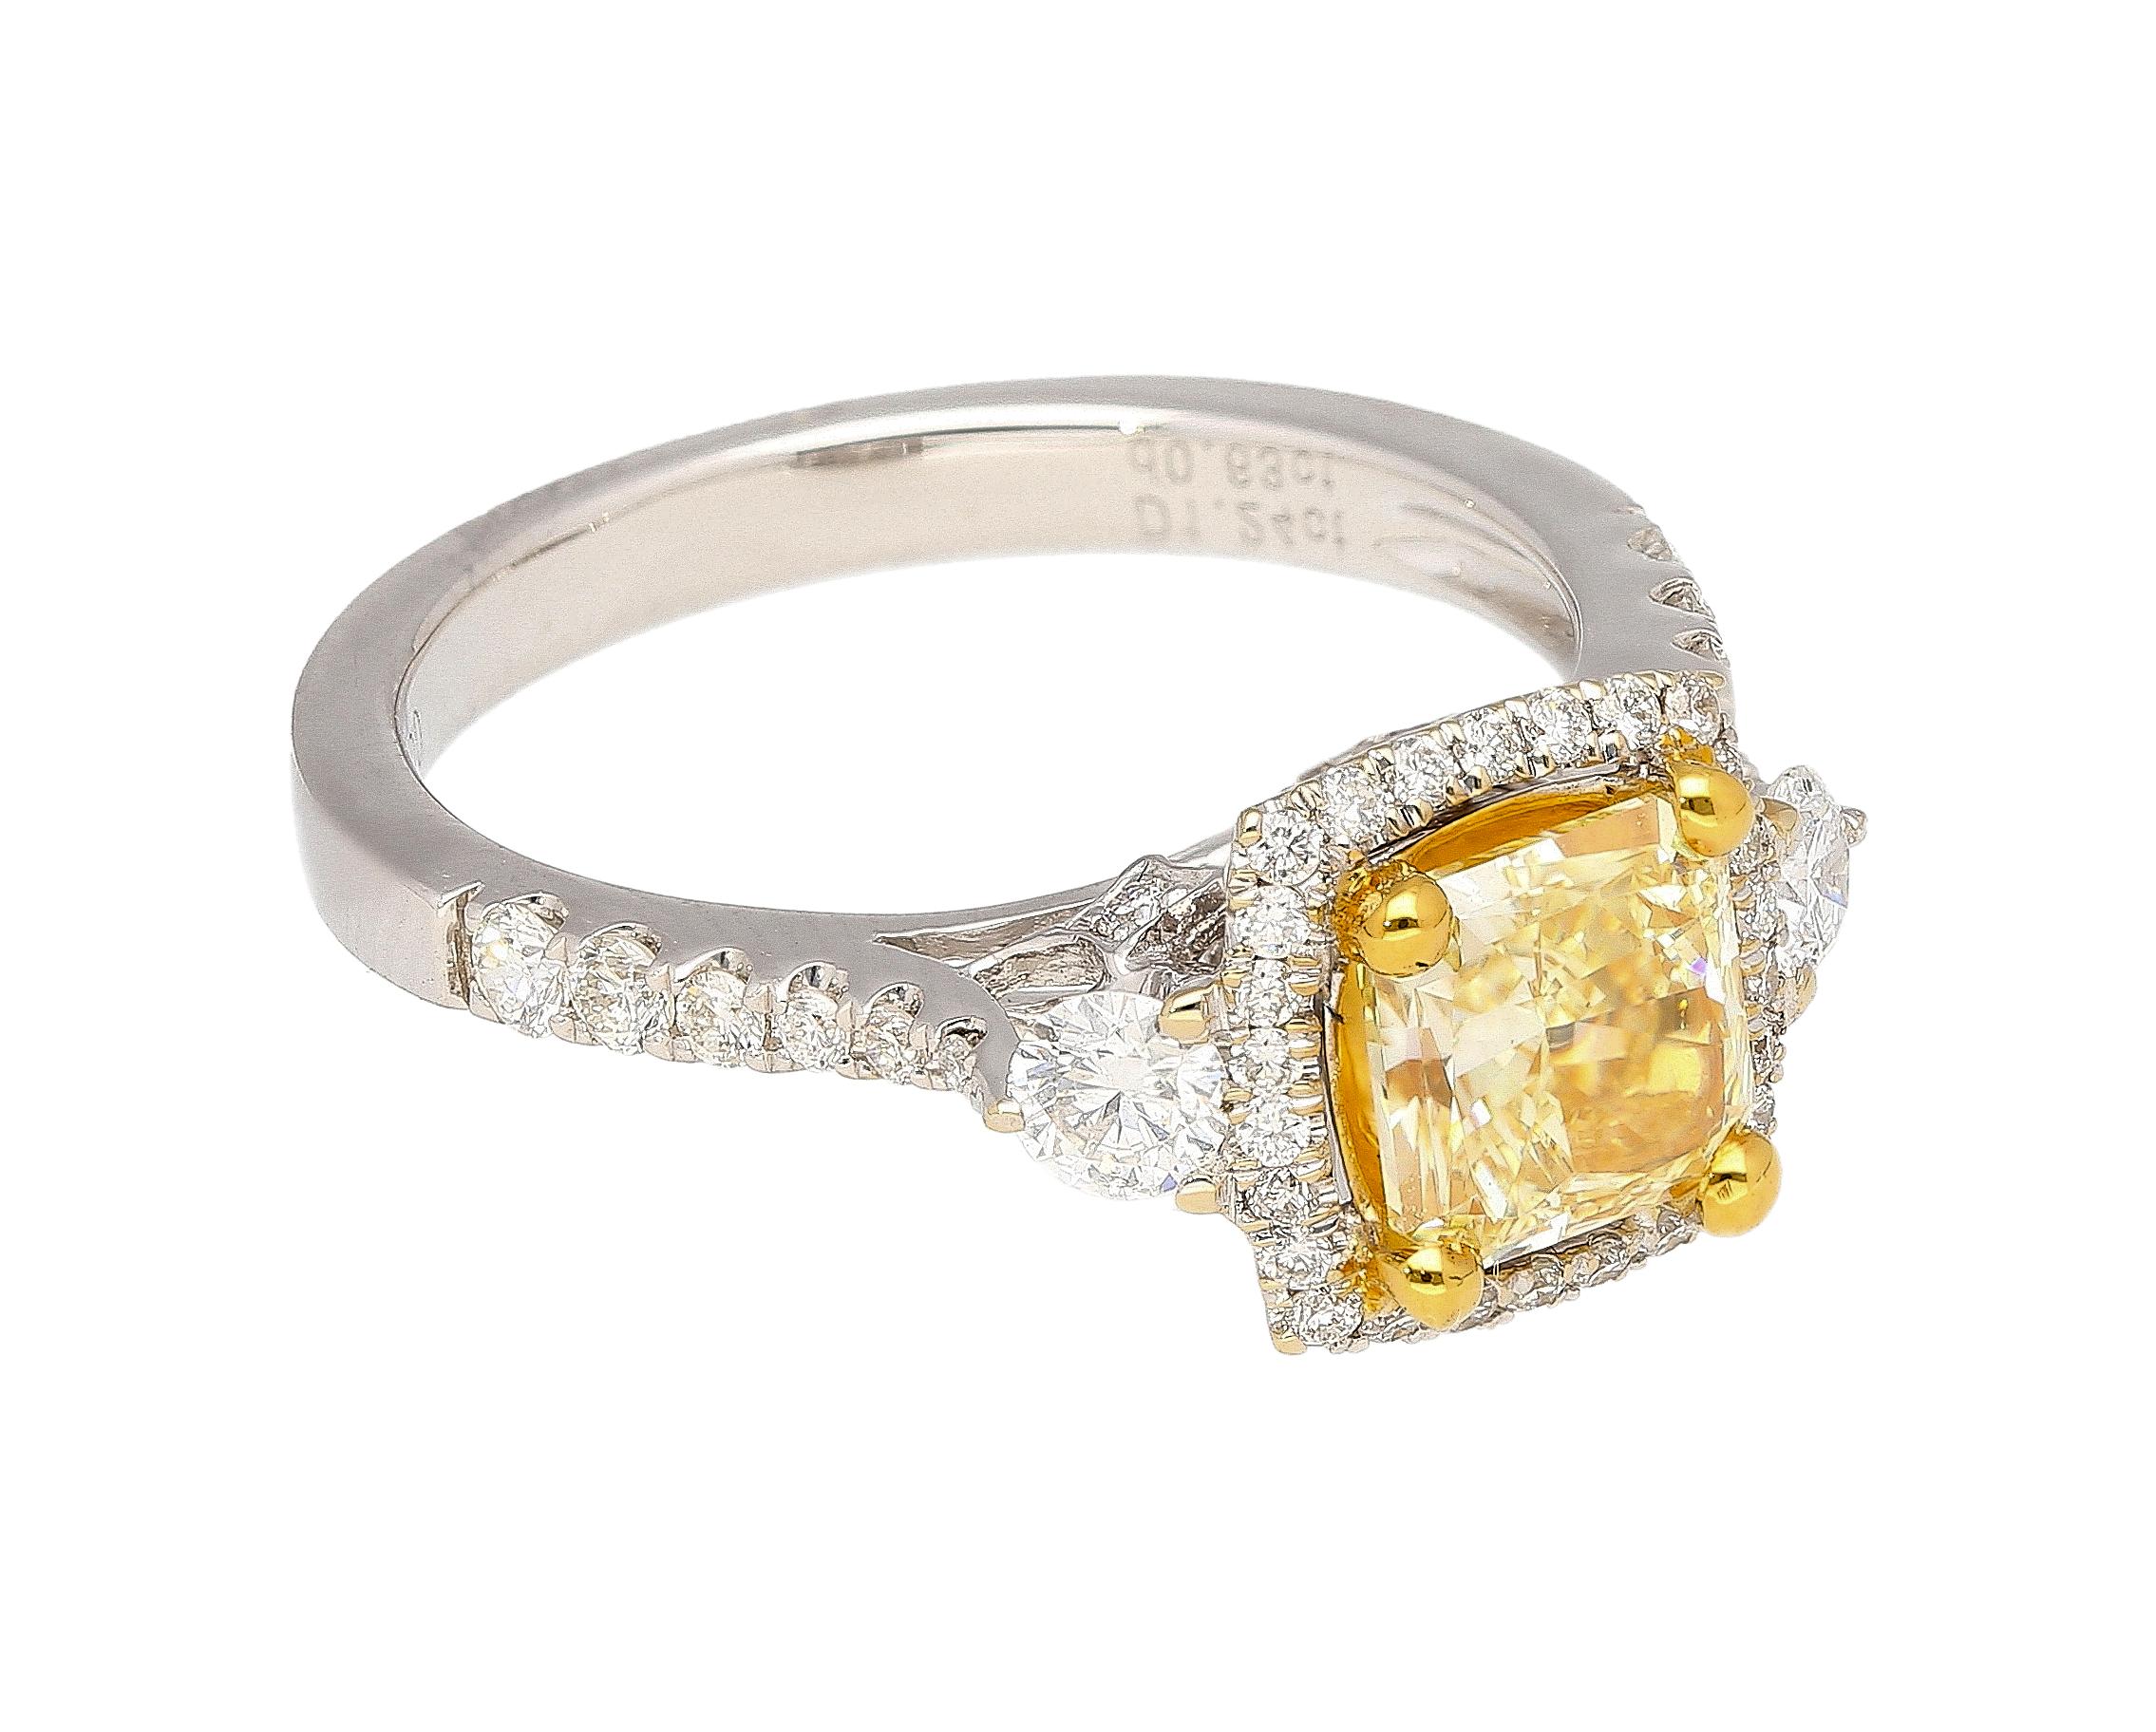 GIA Cert 1.24 Carat Radiant Cut Yellow (Y-Z) Diamond Ring in 18K White Gold In New Condition For Sale In Miami, FL